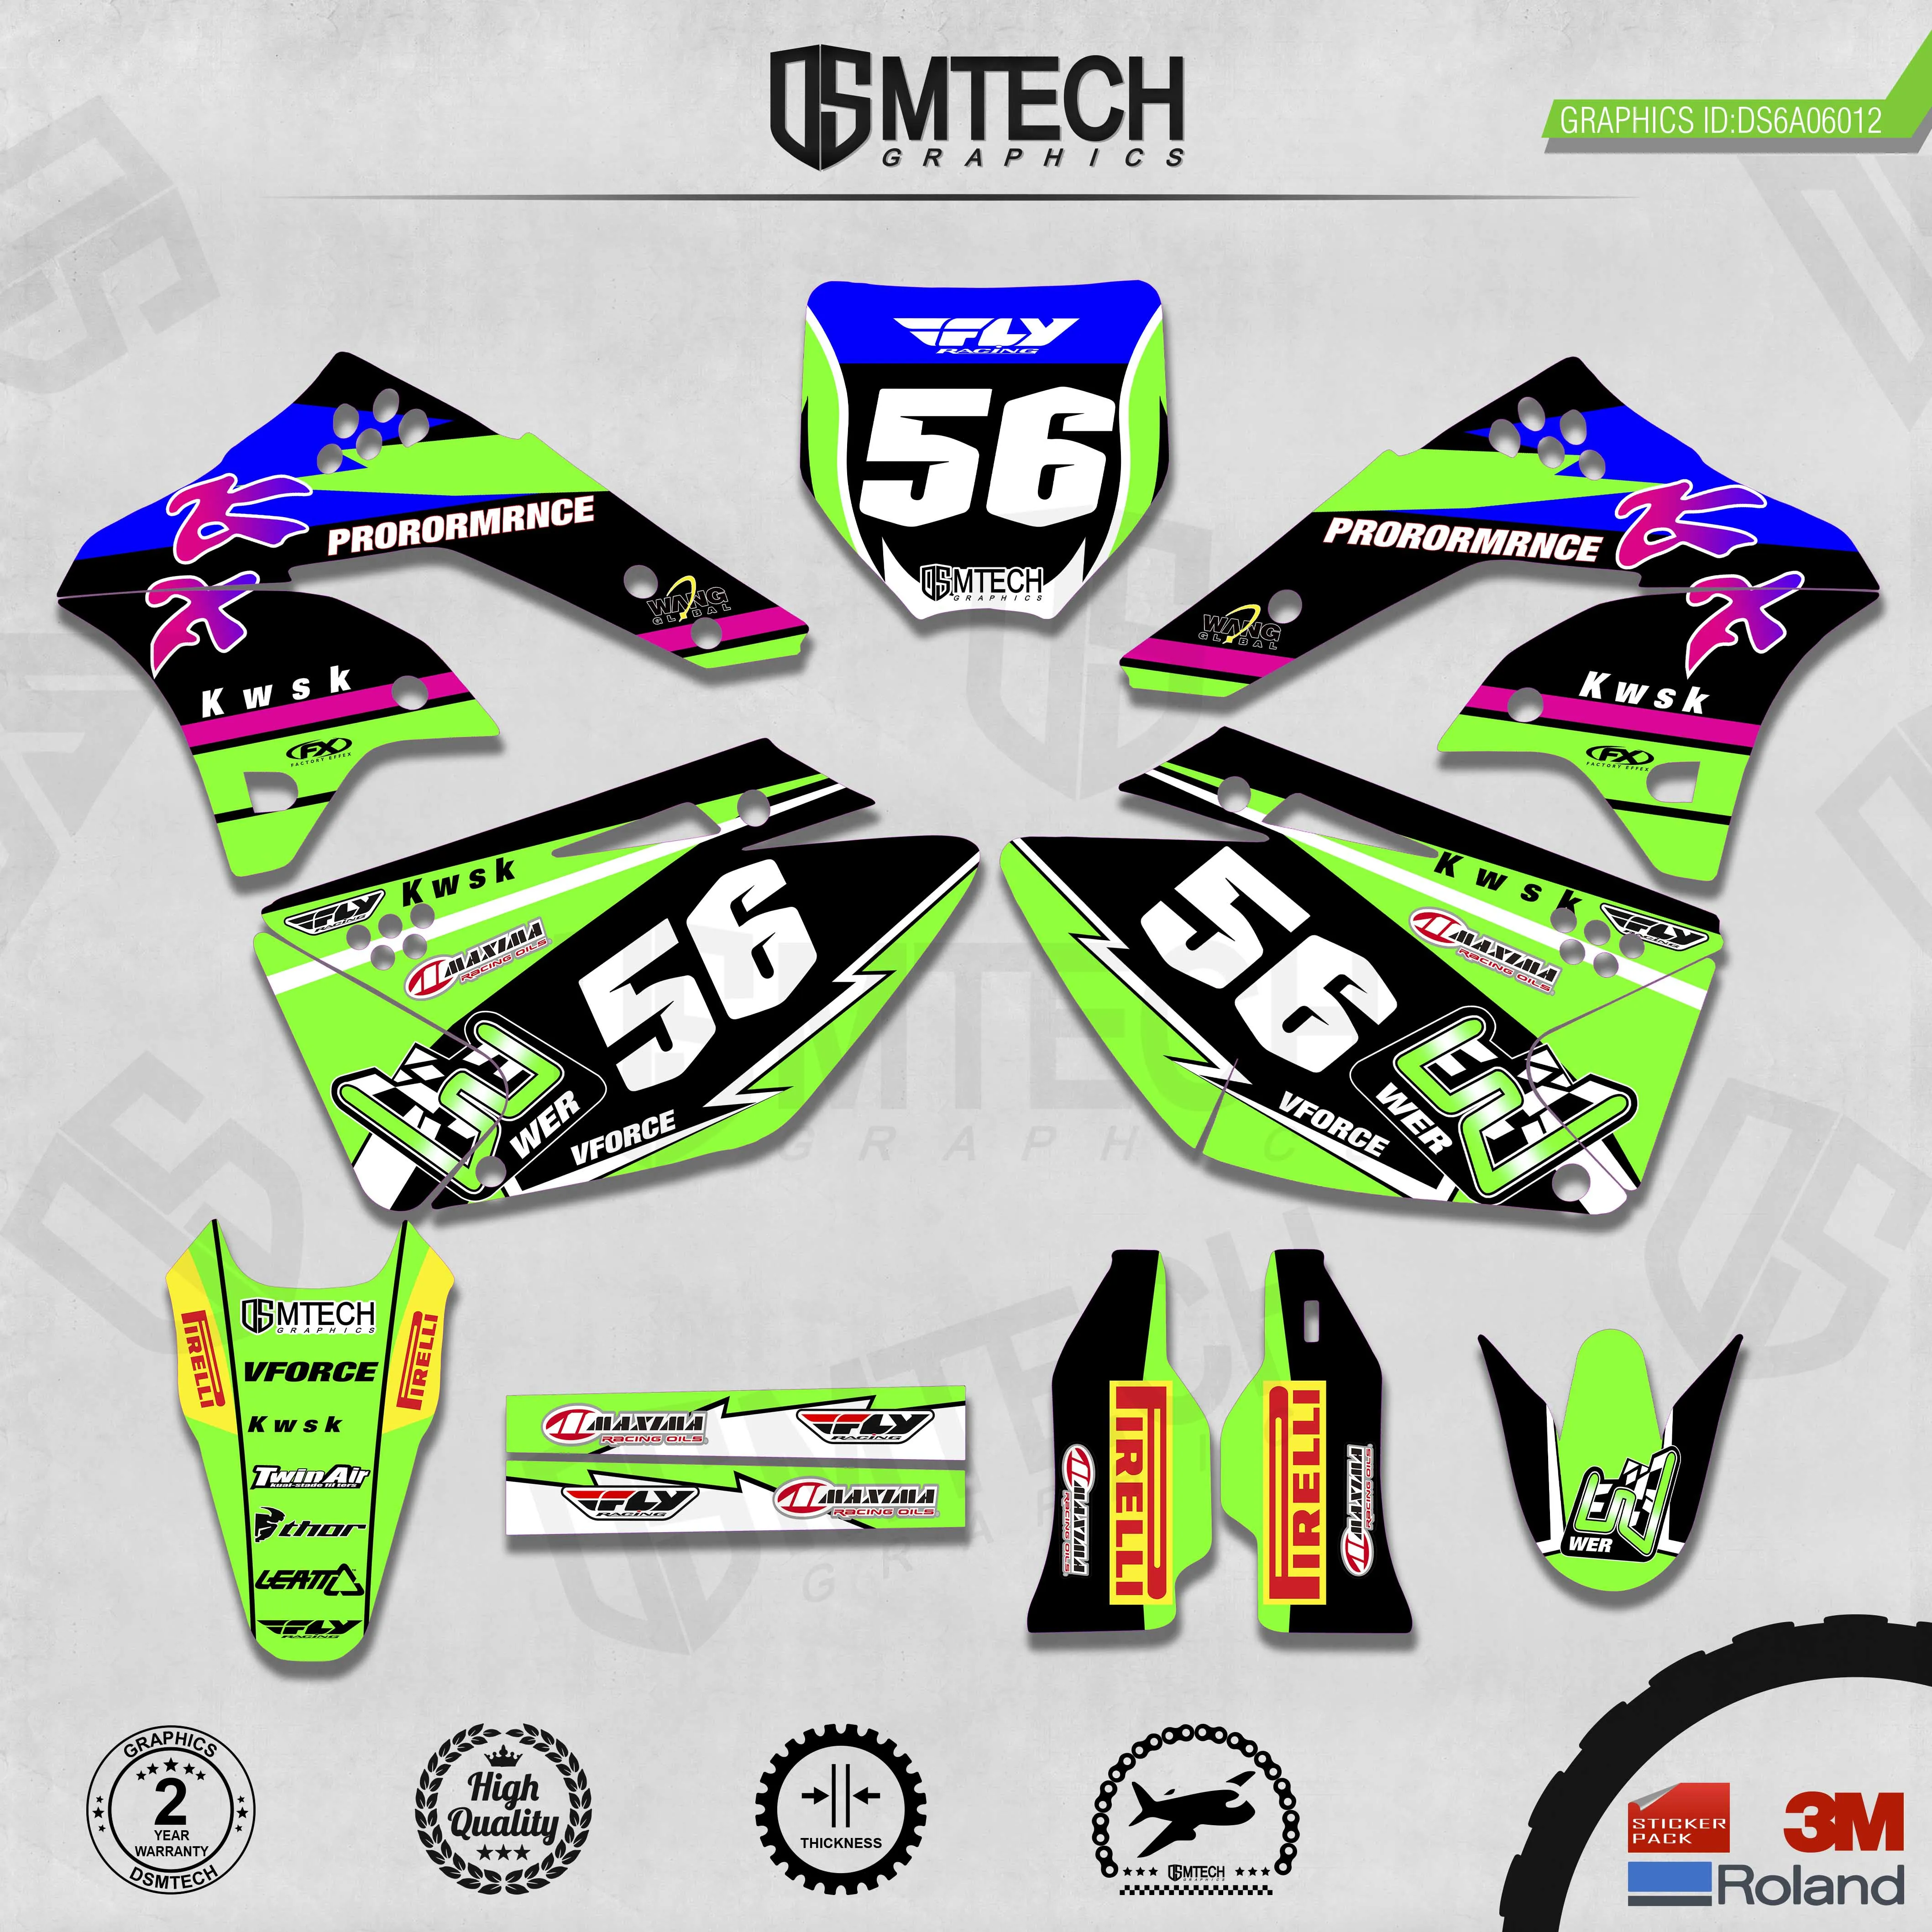 DSMTECH Customized Team Graphics Backgrounds Decals 3M Custom Stickers For KAWASAKI  2006-2007 2008 KXF250 012